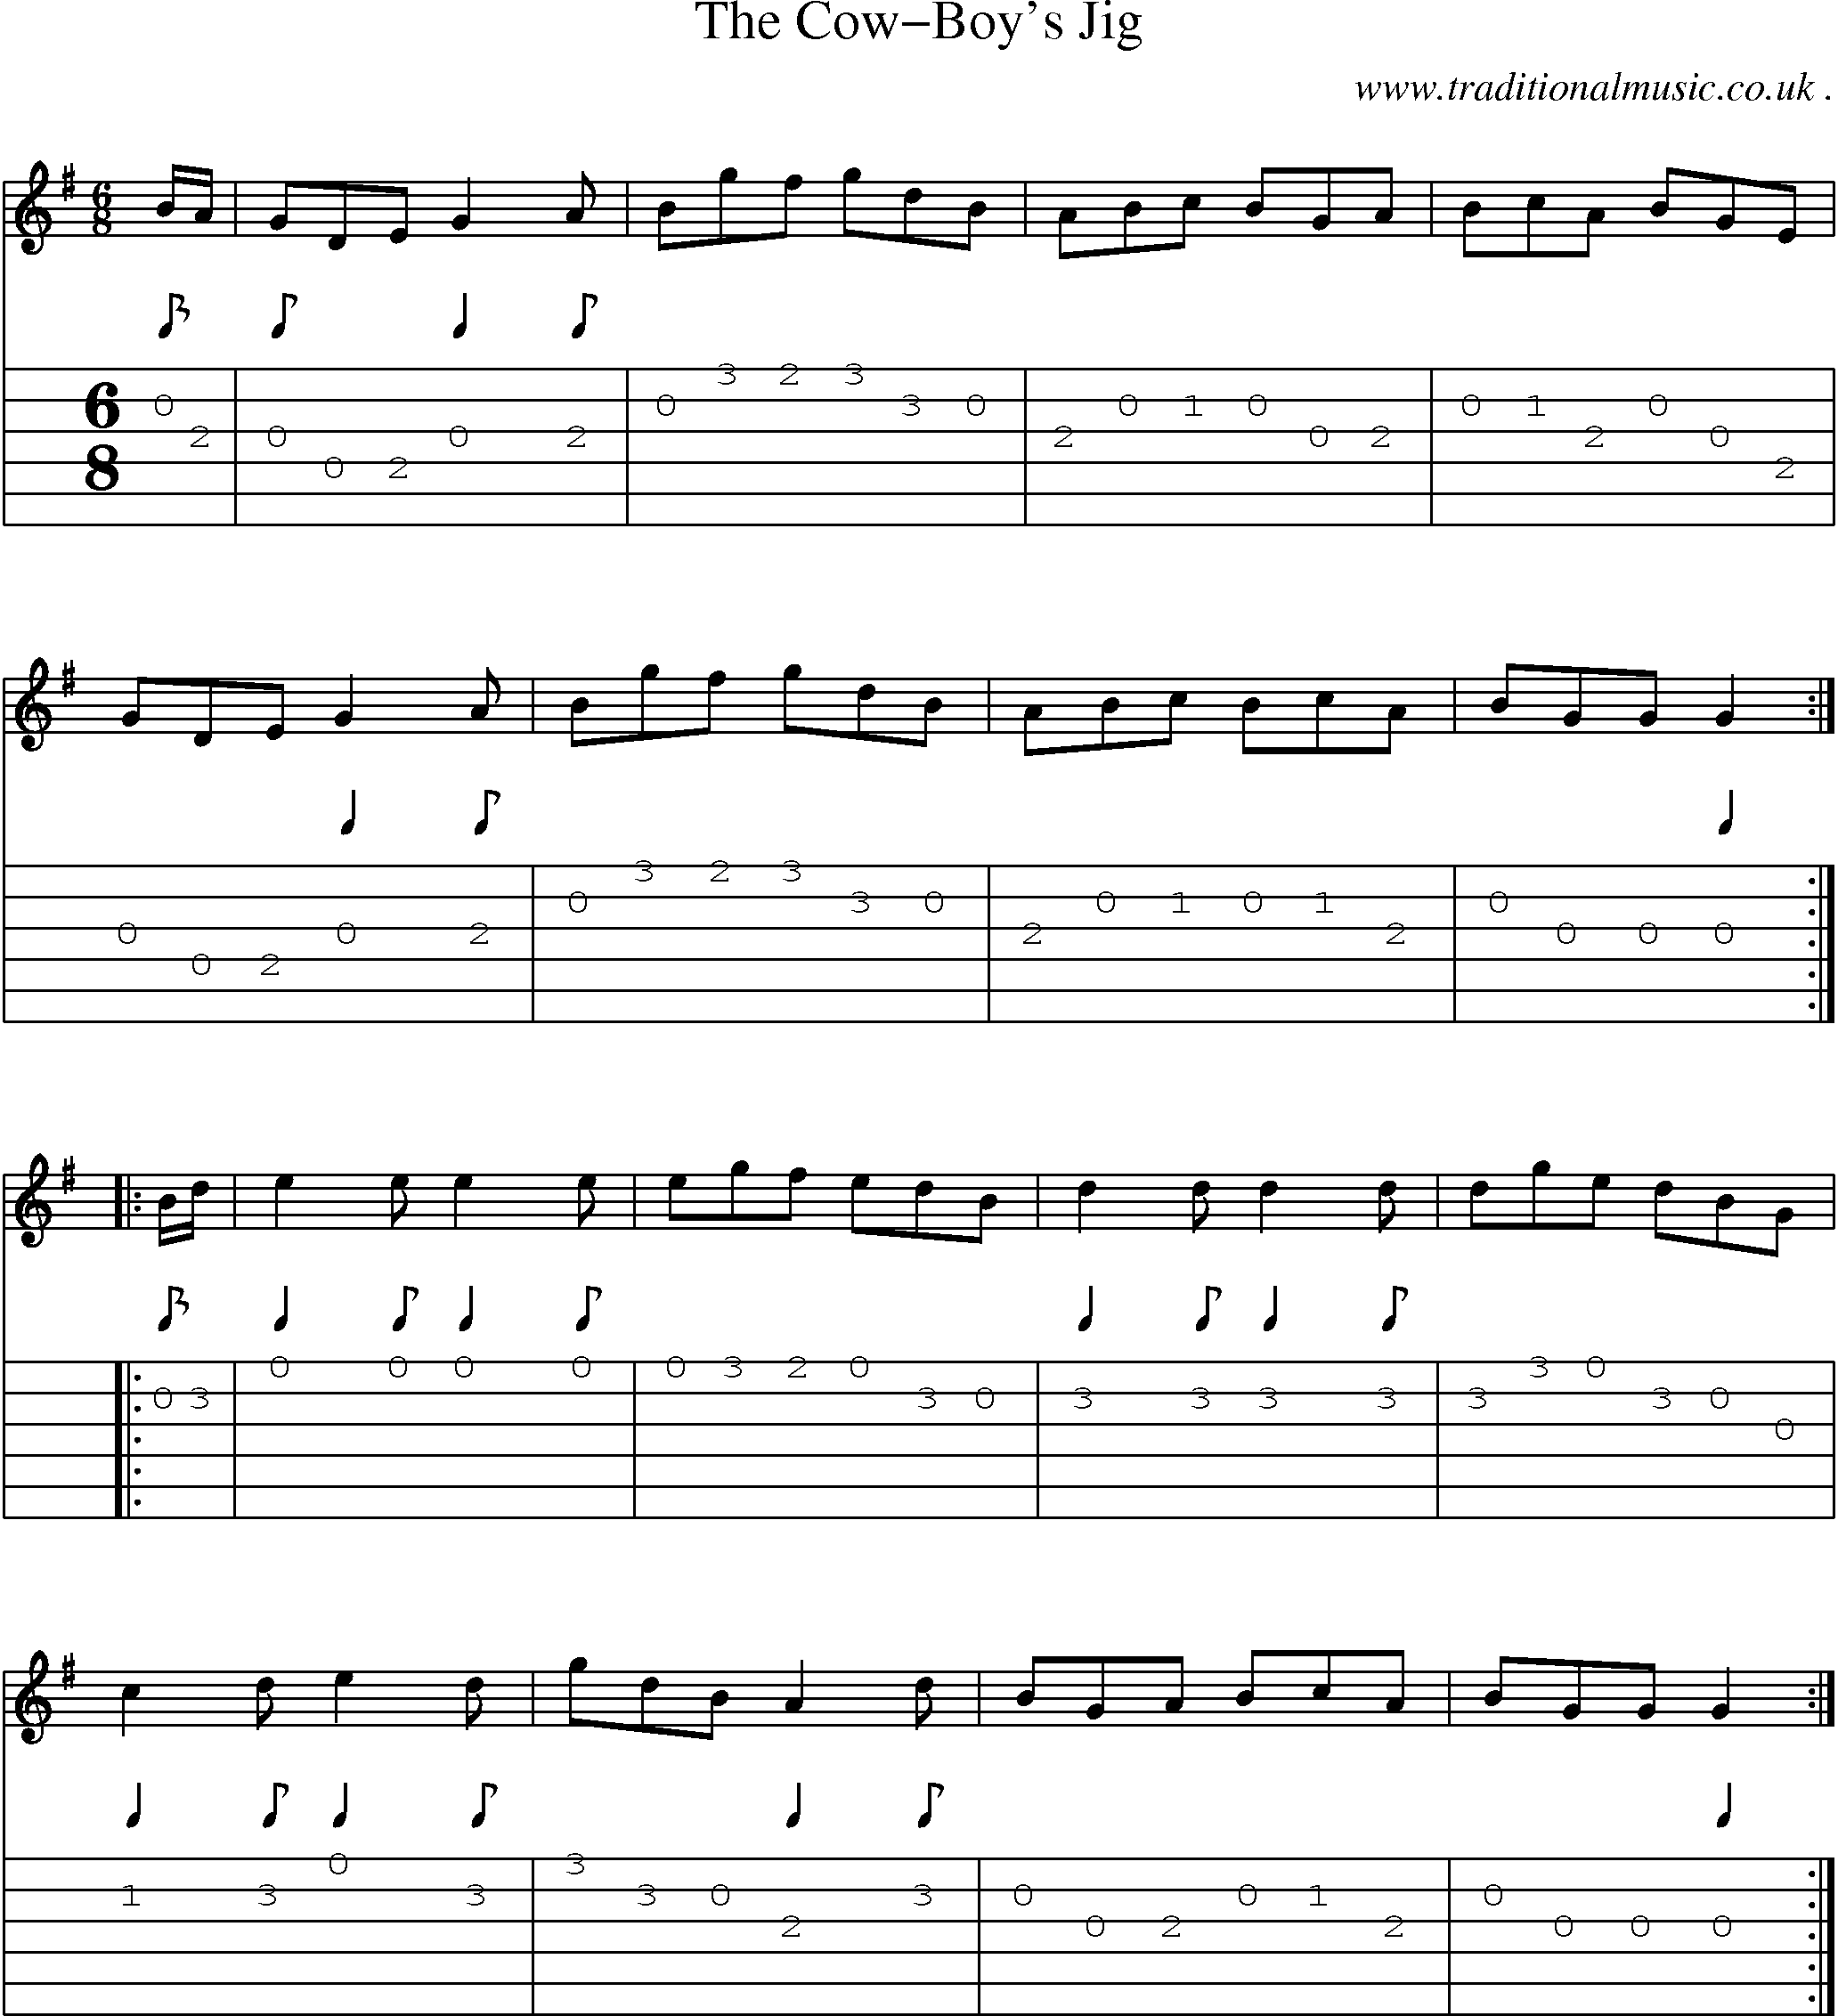 Sheet-Music and Guitar Tabs for The Cow-boys Jig